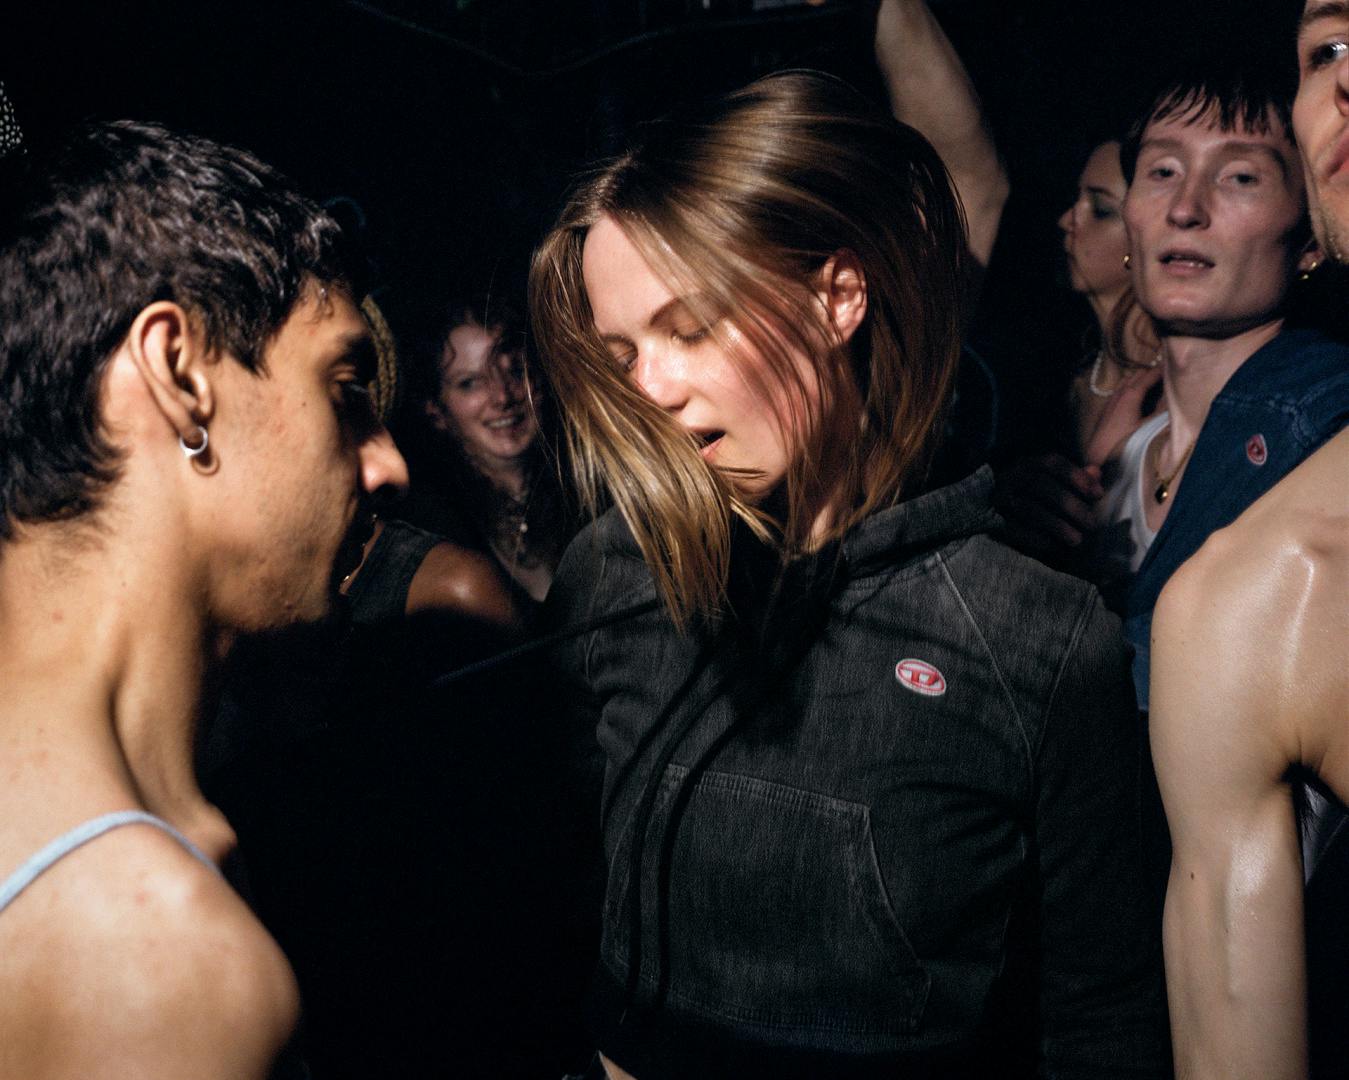 Photo of young people in a club for Diesel's Track Denim campaign by Ewen Spencer